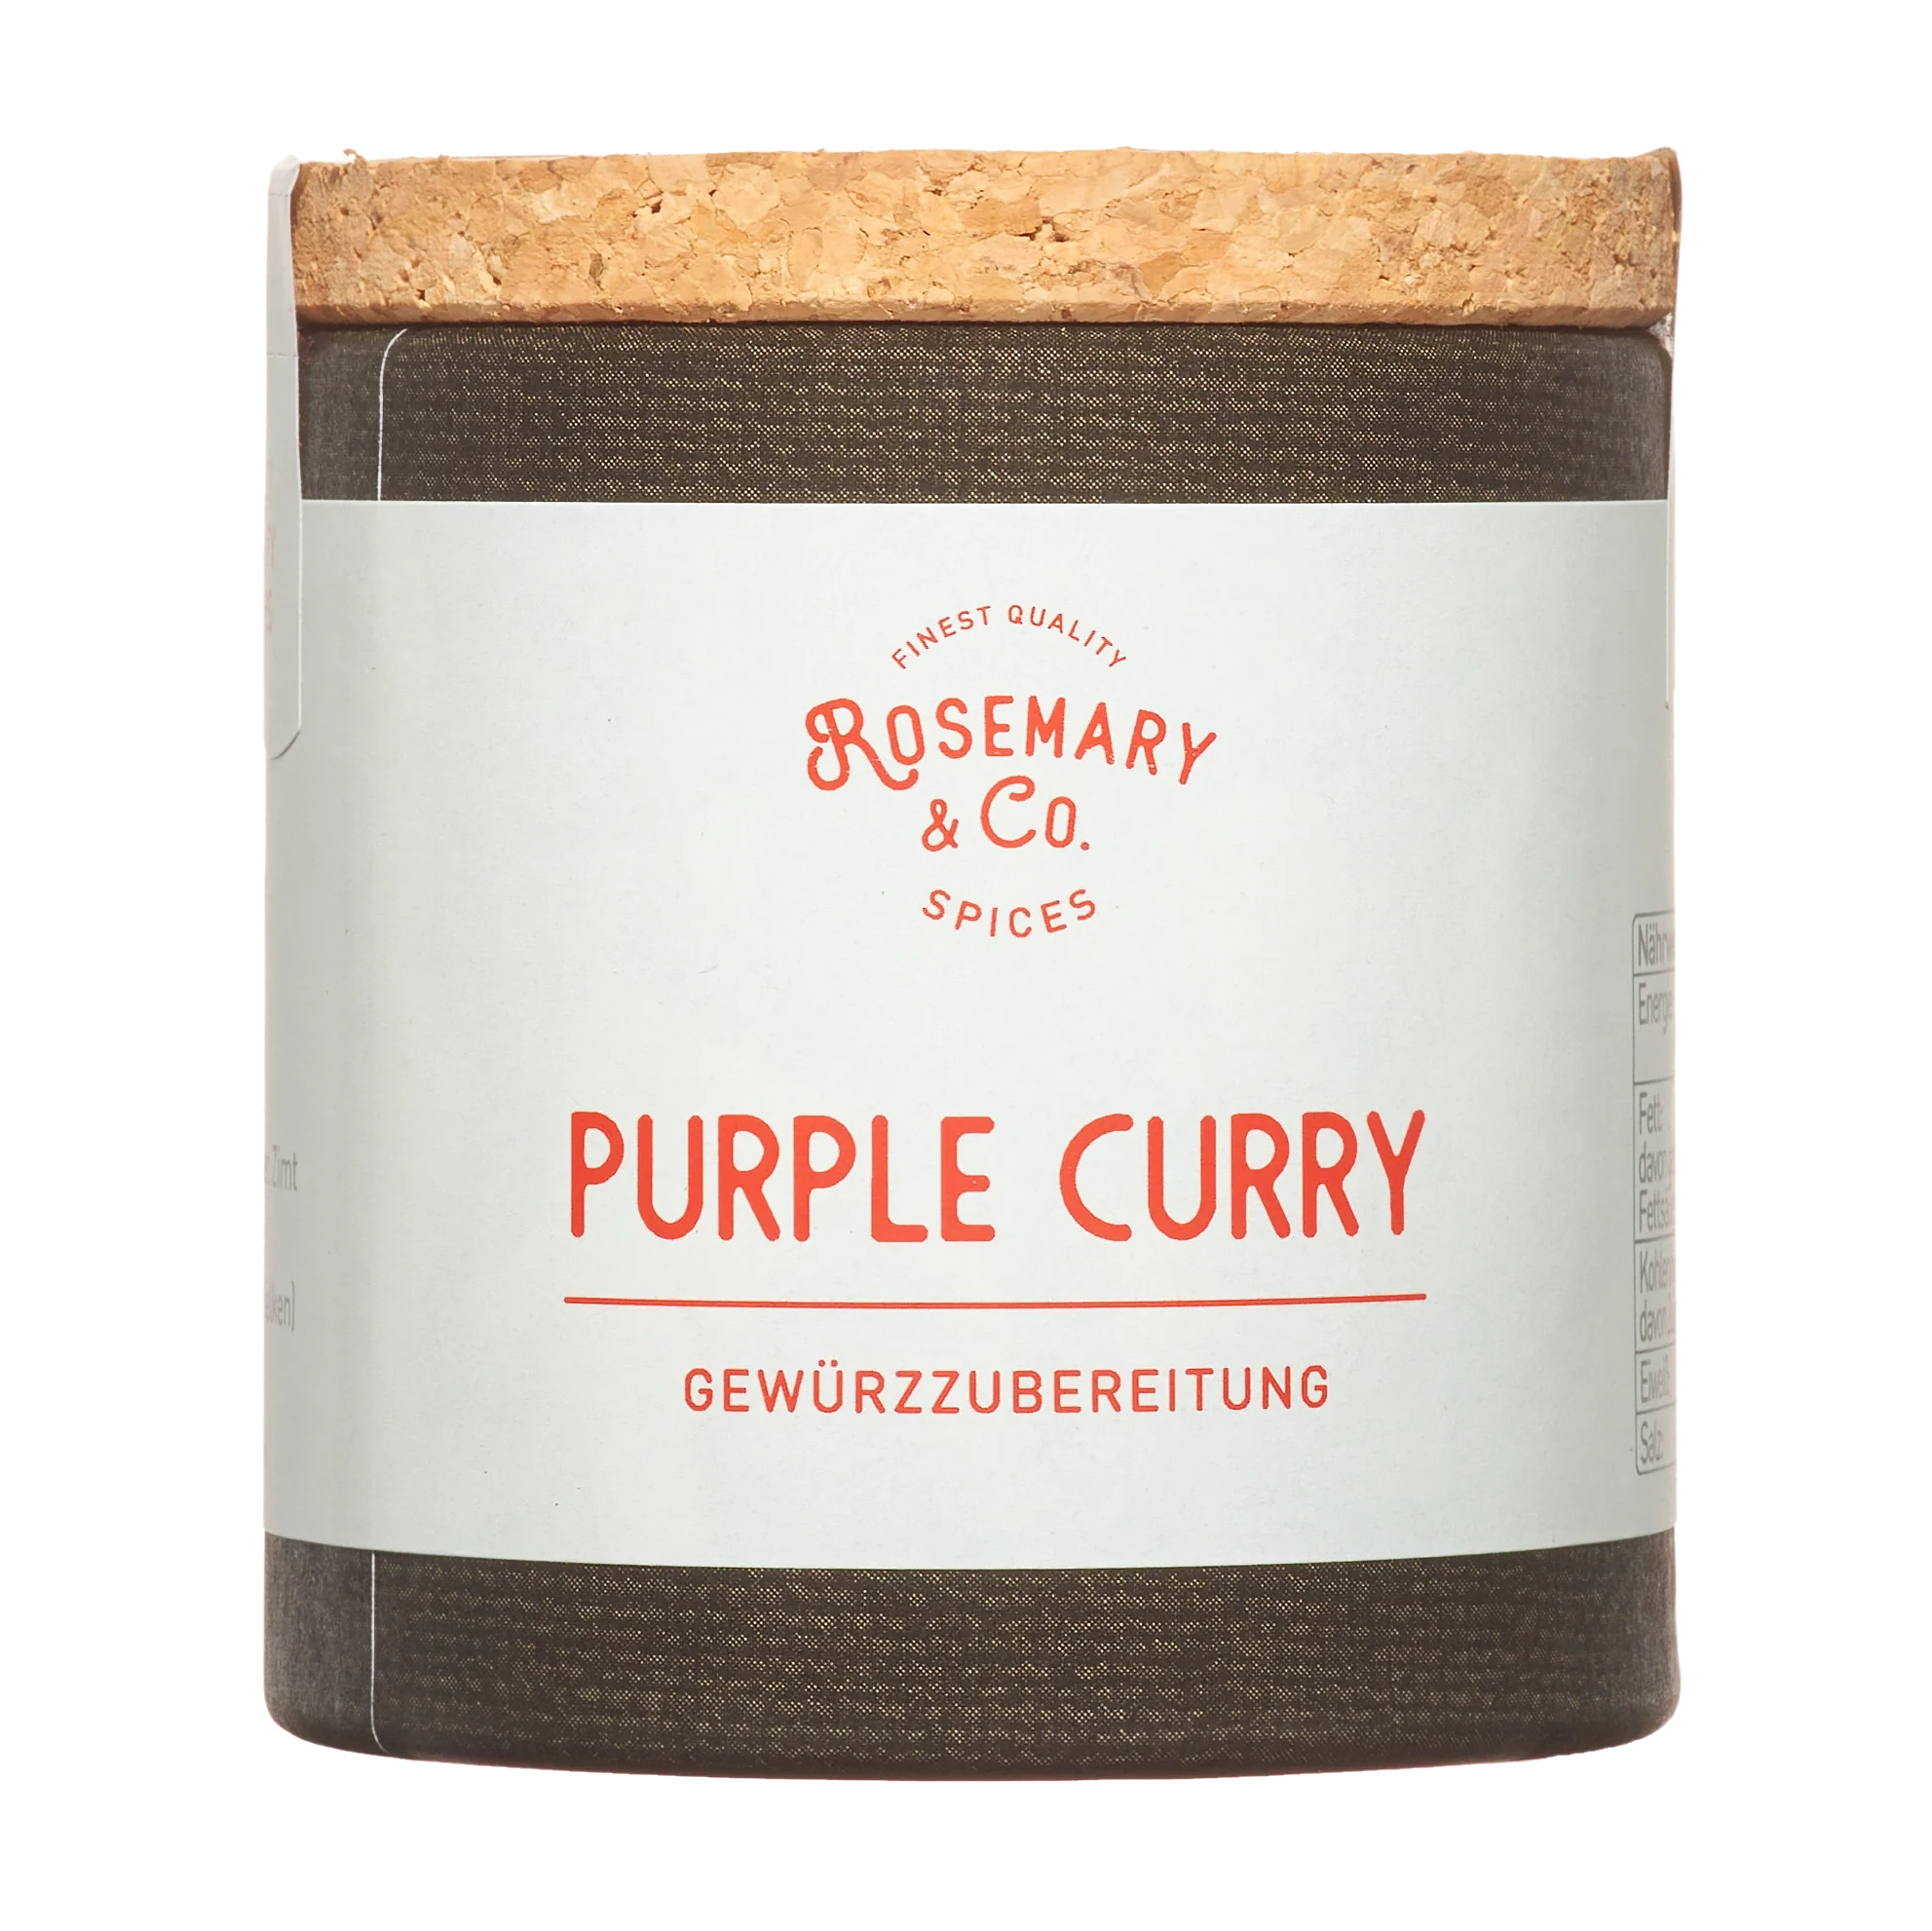 Rosemary & Co. Purple Curry